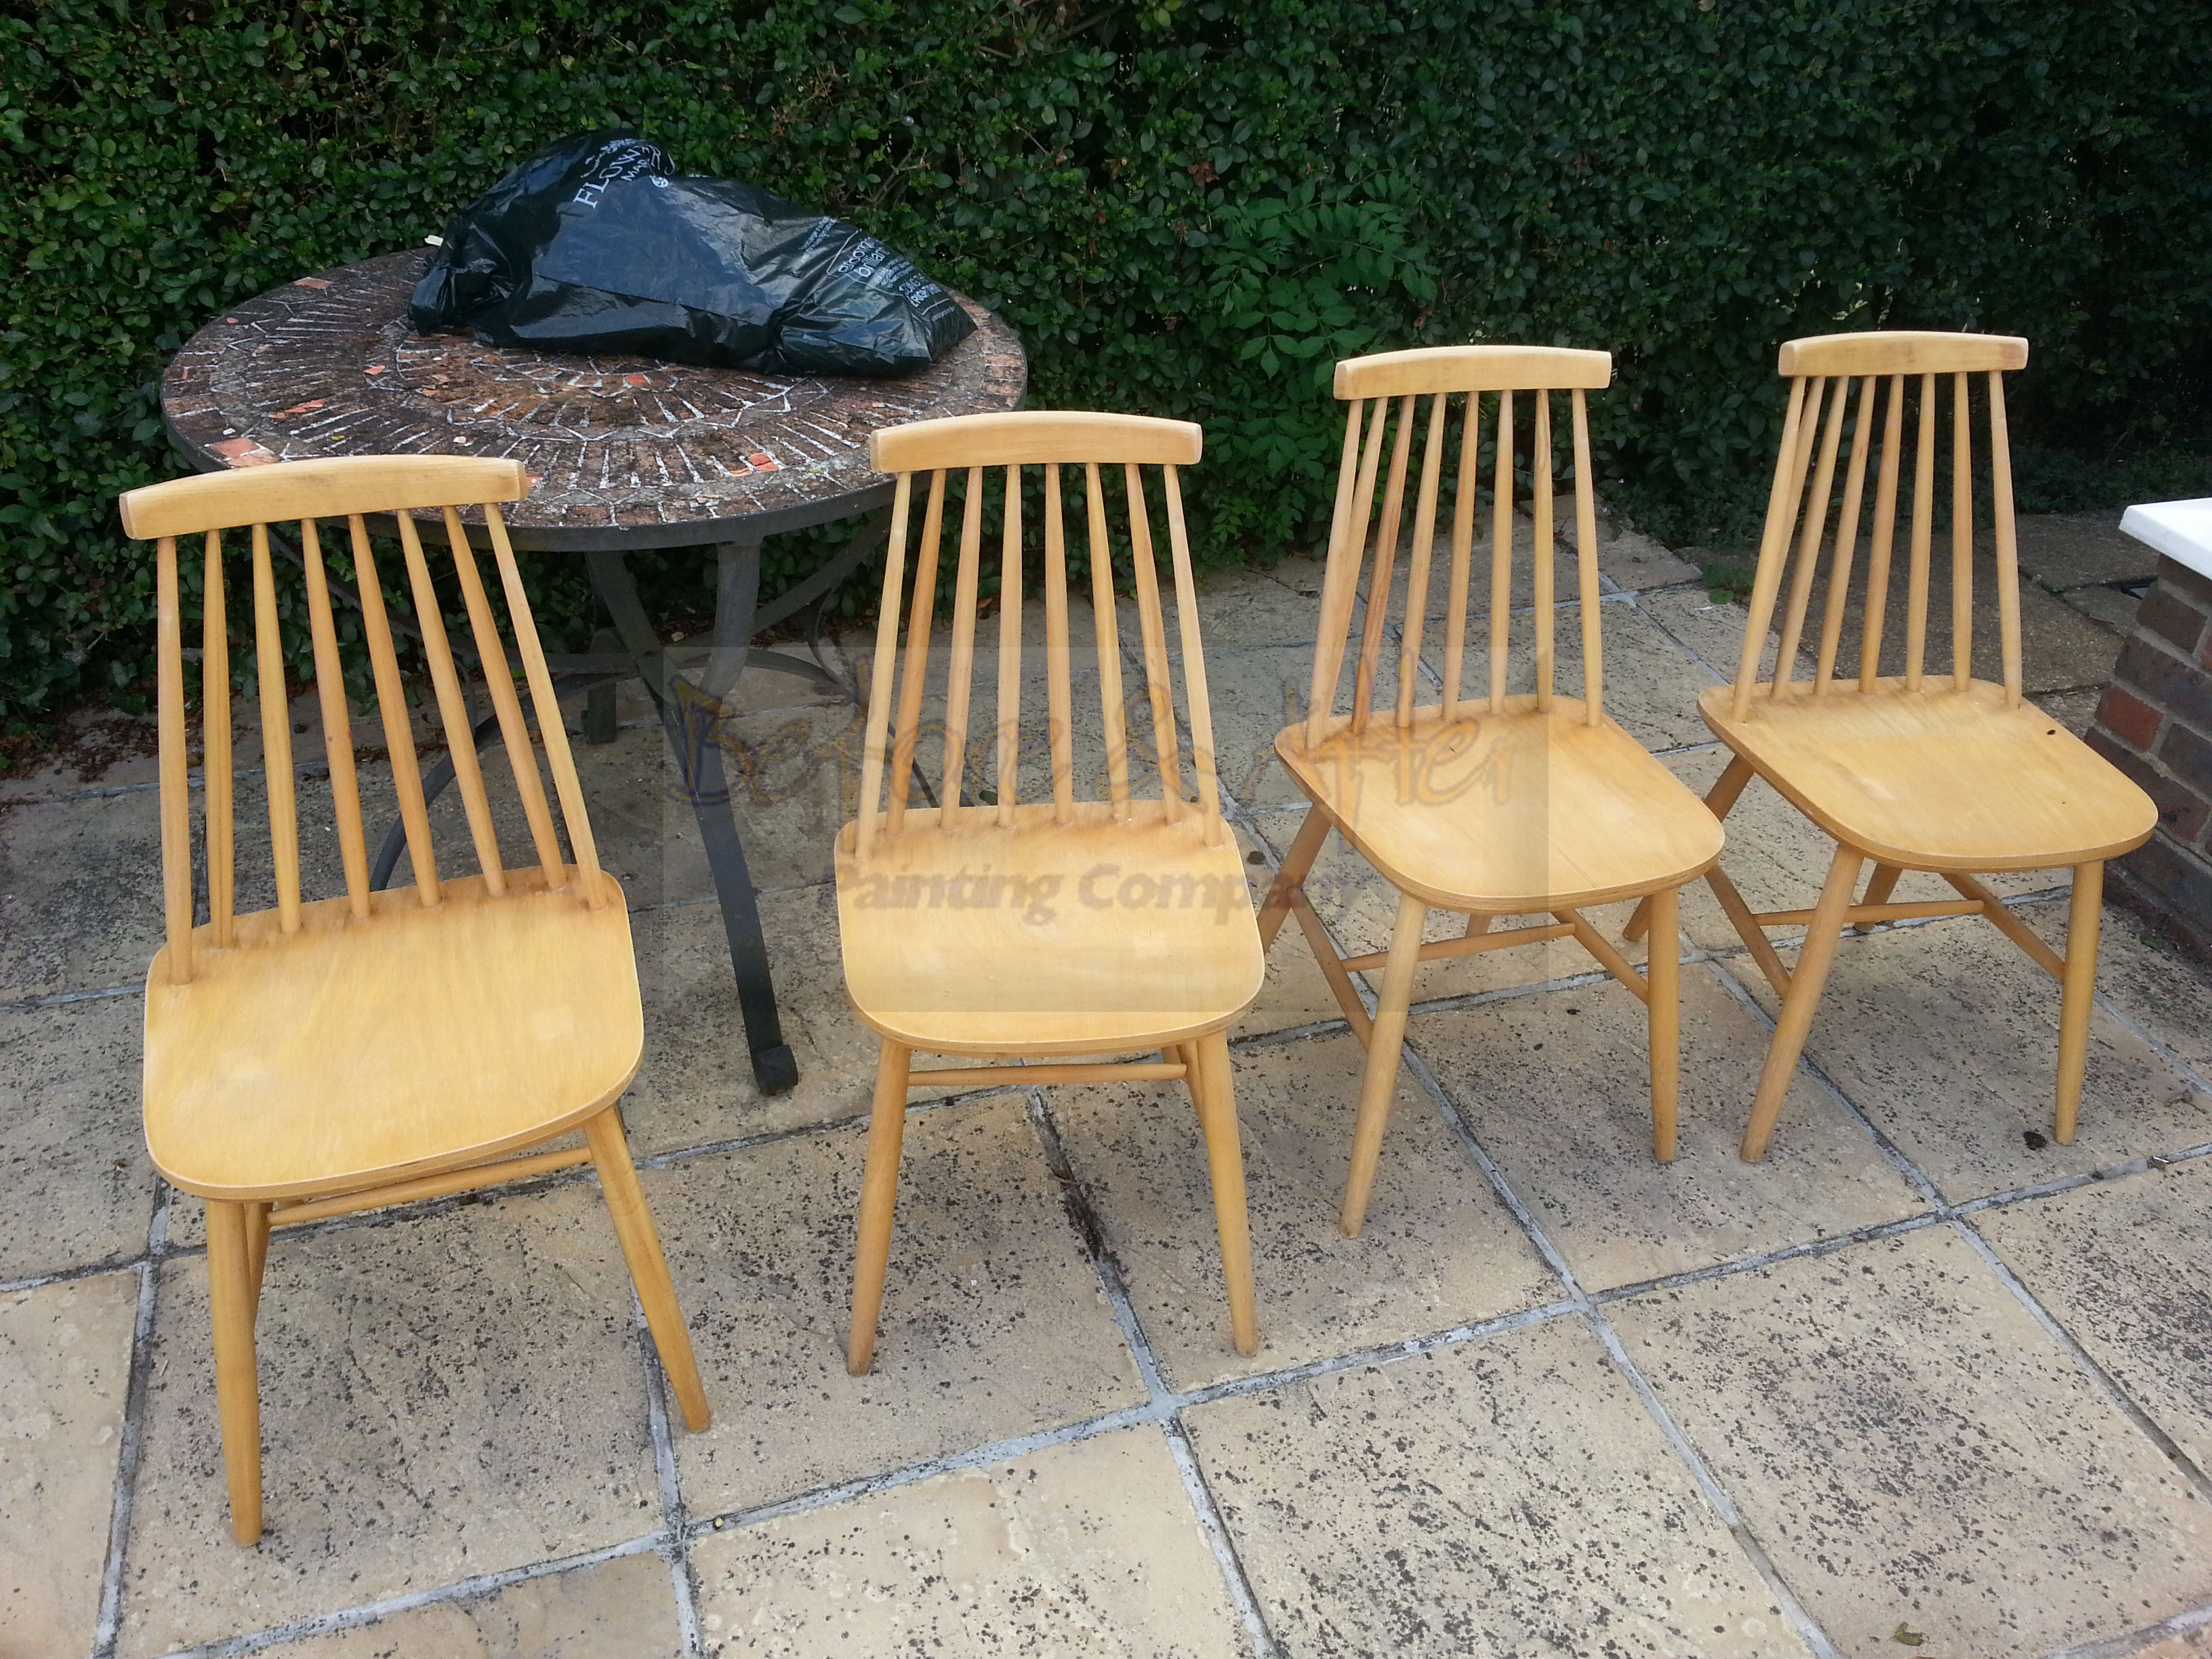 Ercol chairs cleaned down with Krud Kutter Original